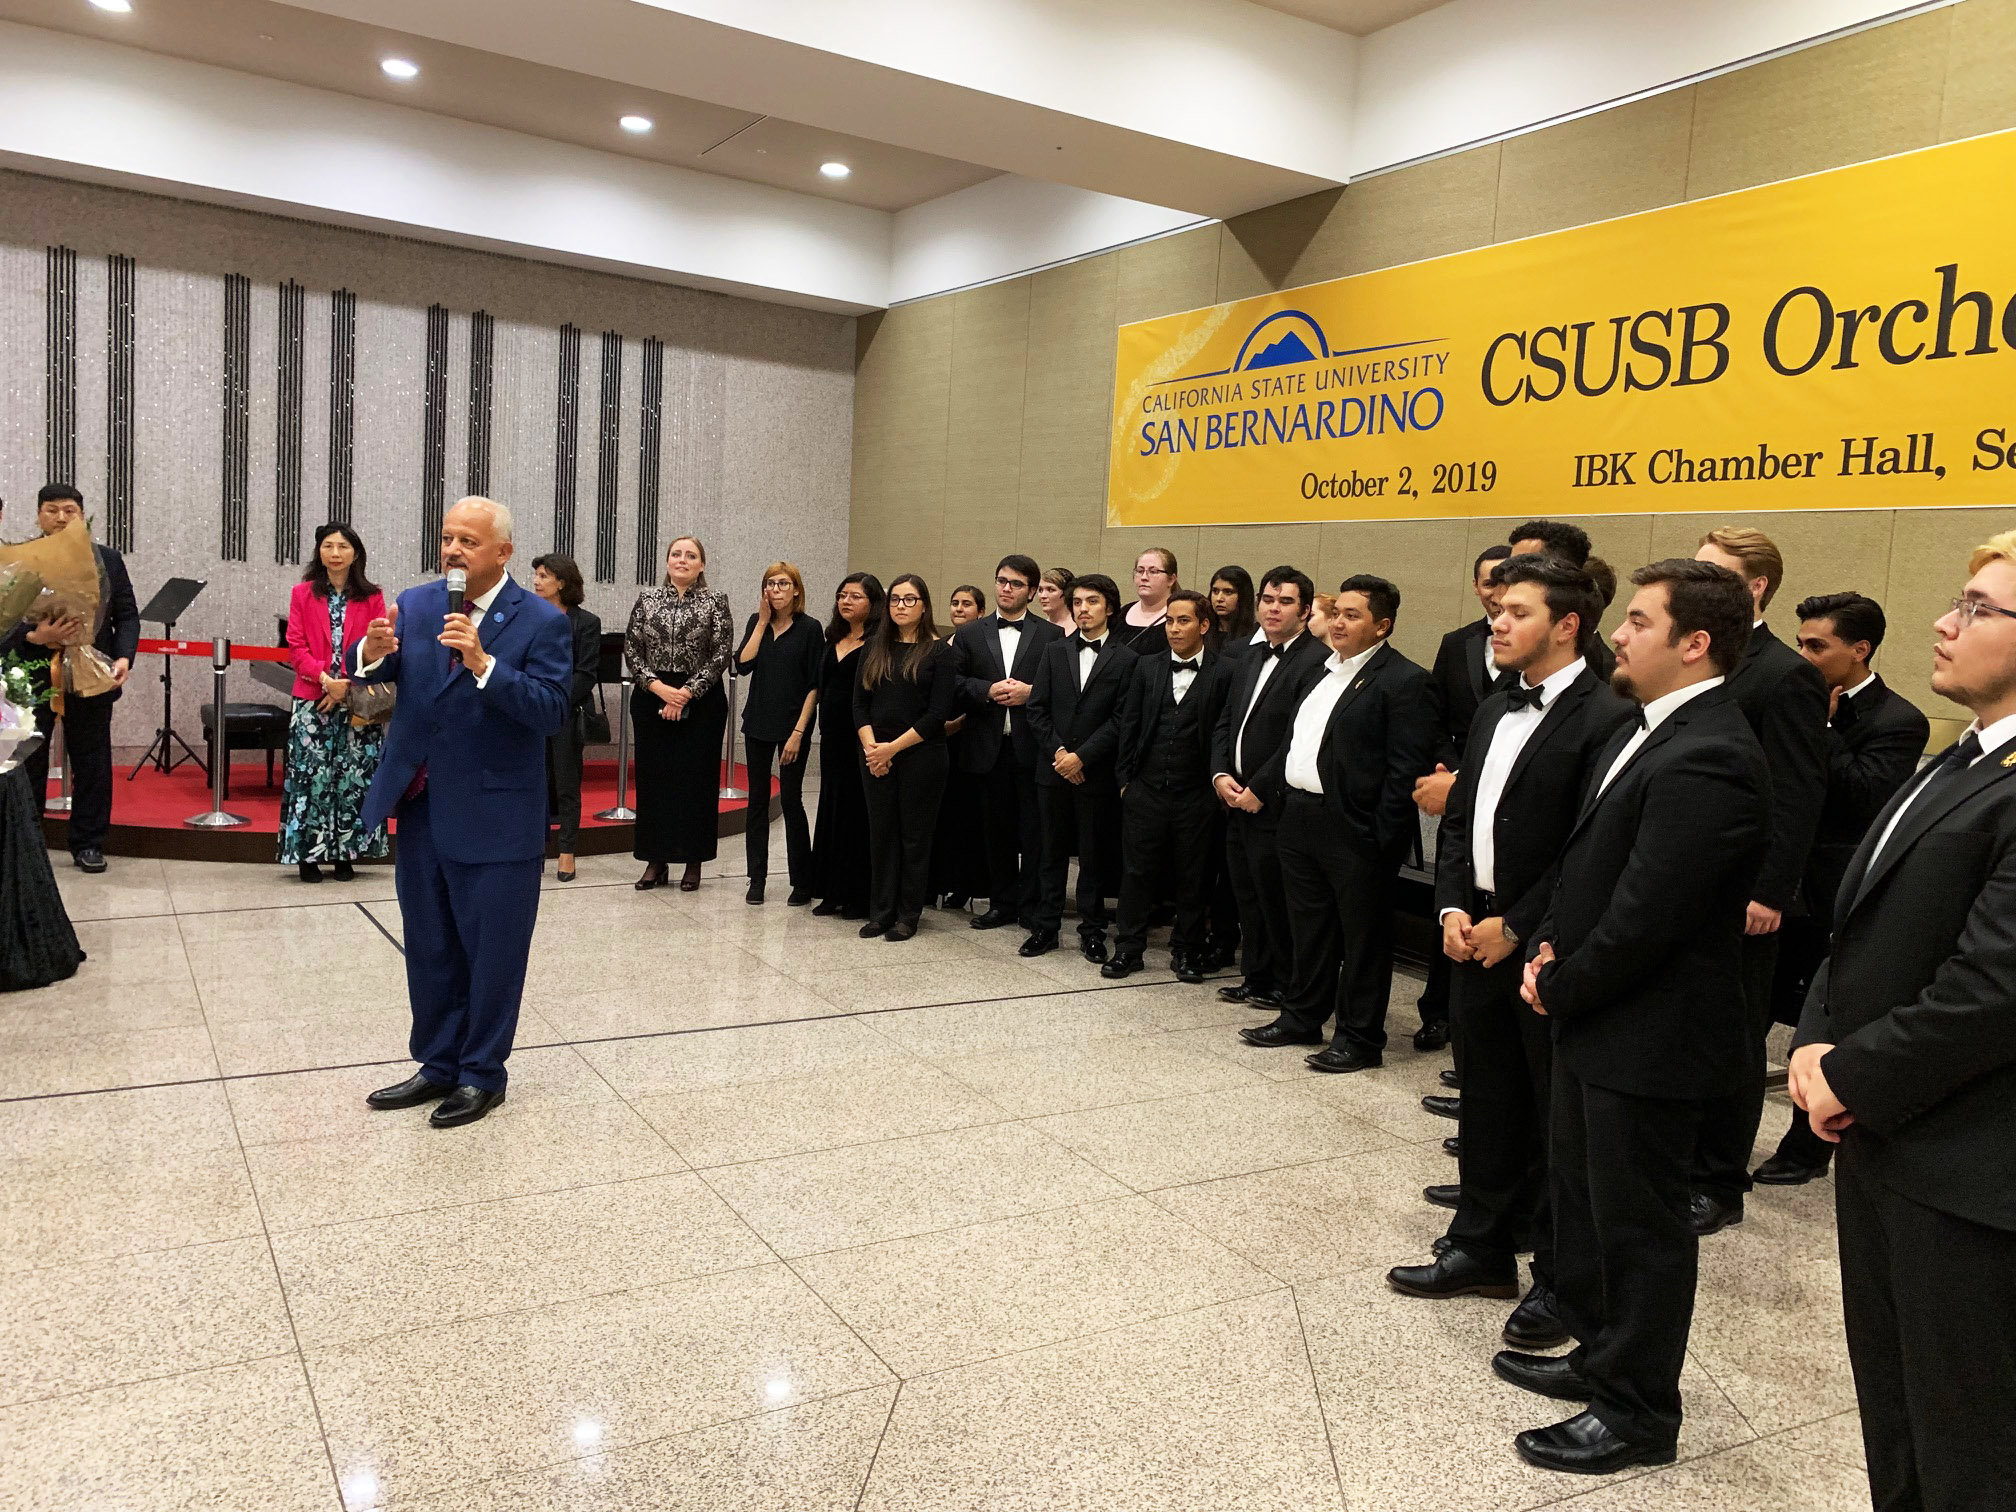 CSUSB President Tomás D. Morales speaking at the CSUSB Orchestra Concert 